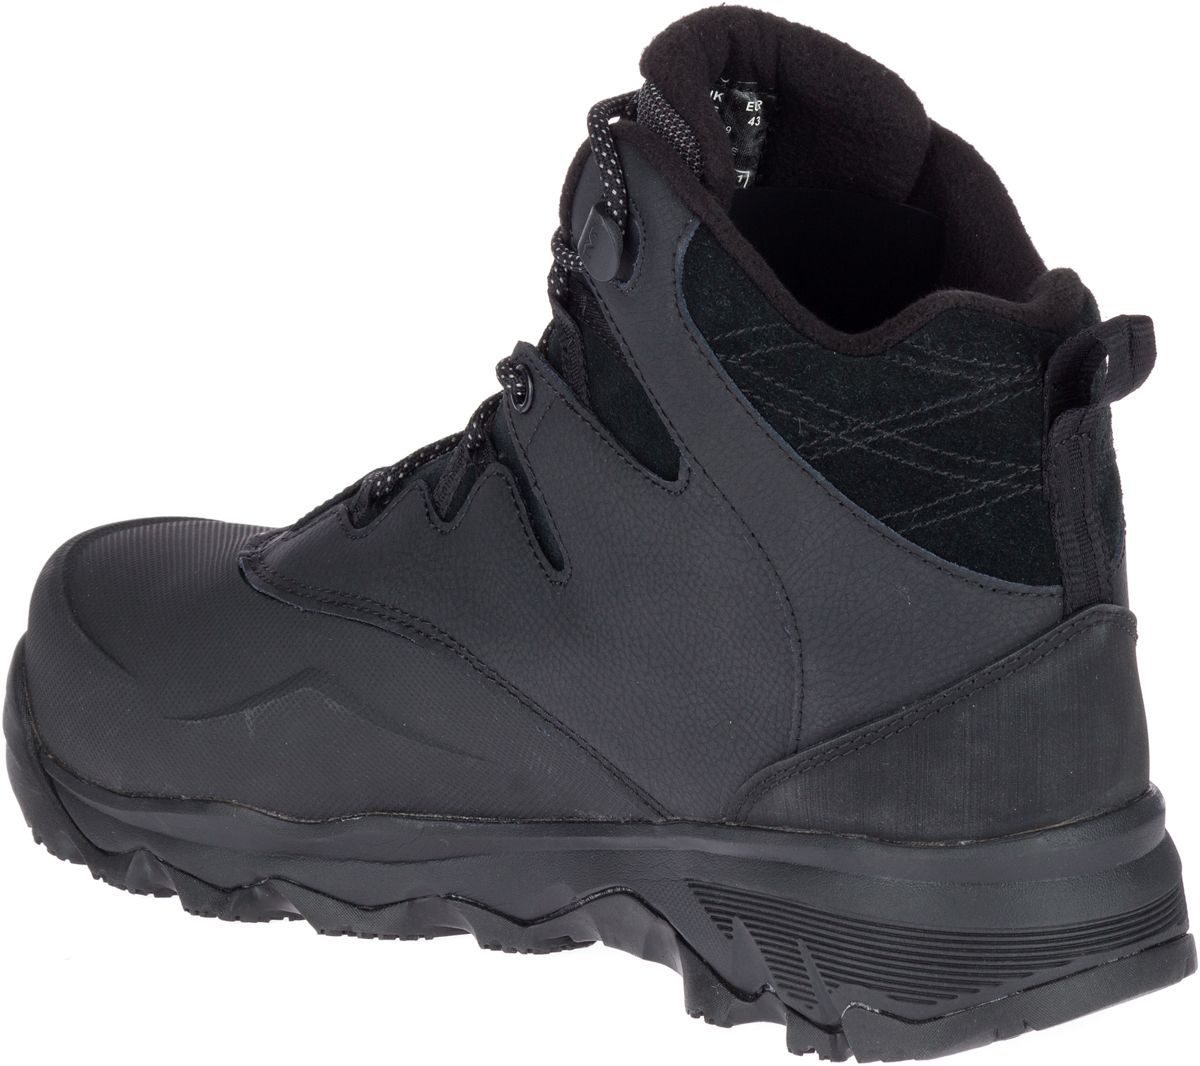 merrell men's thermo 6 hiking boot